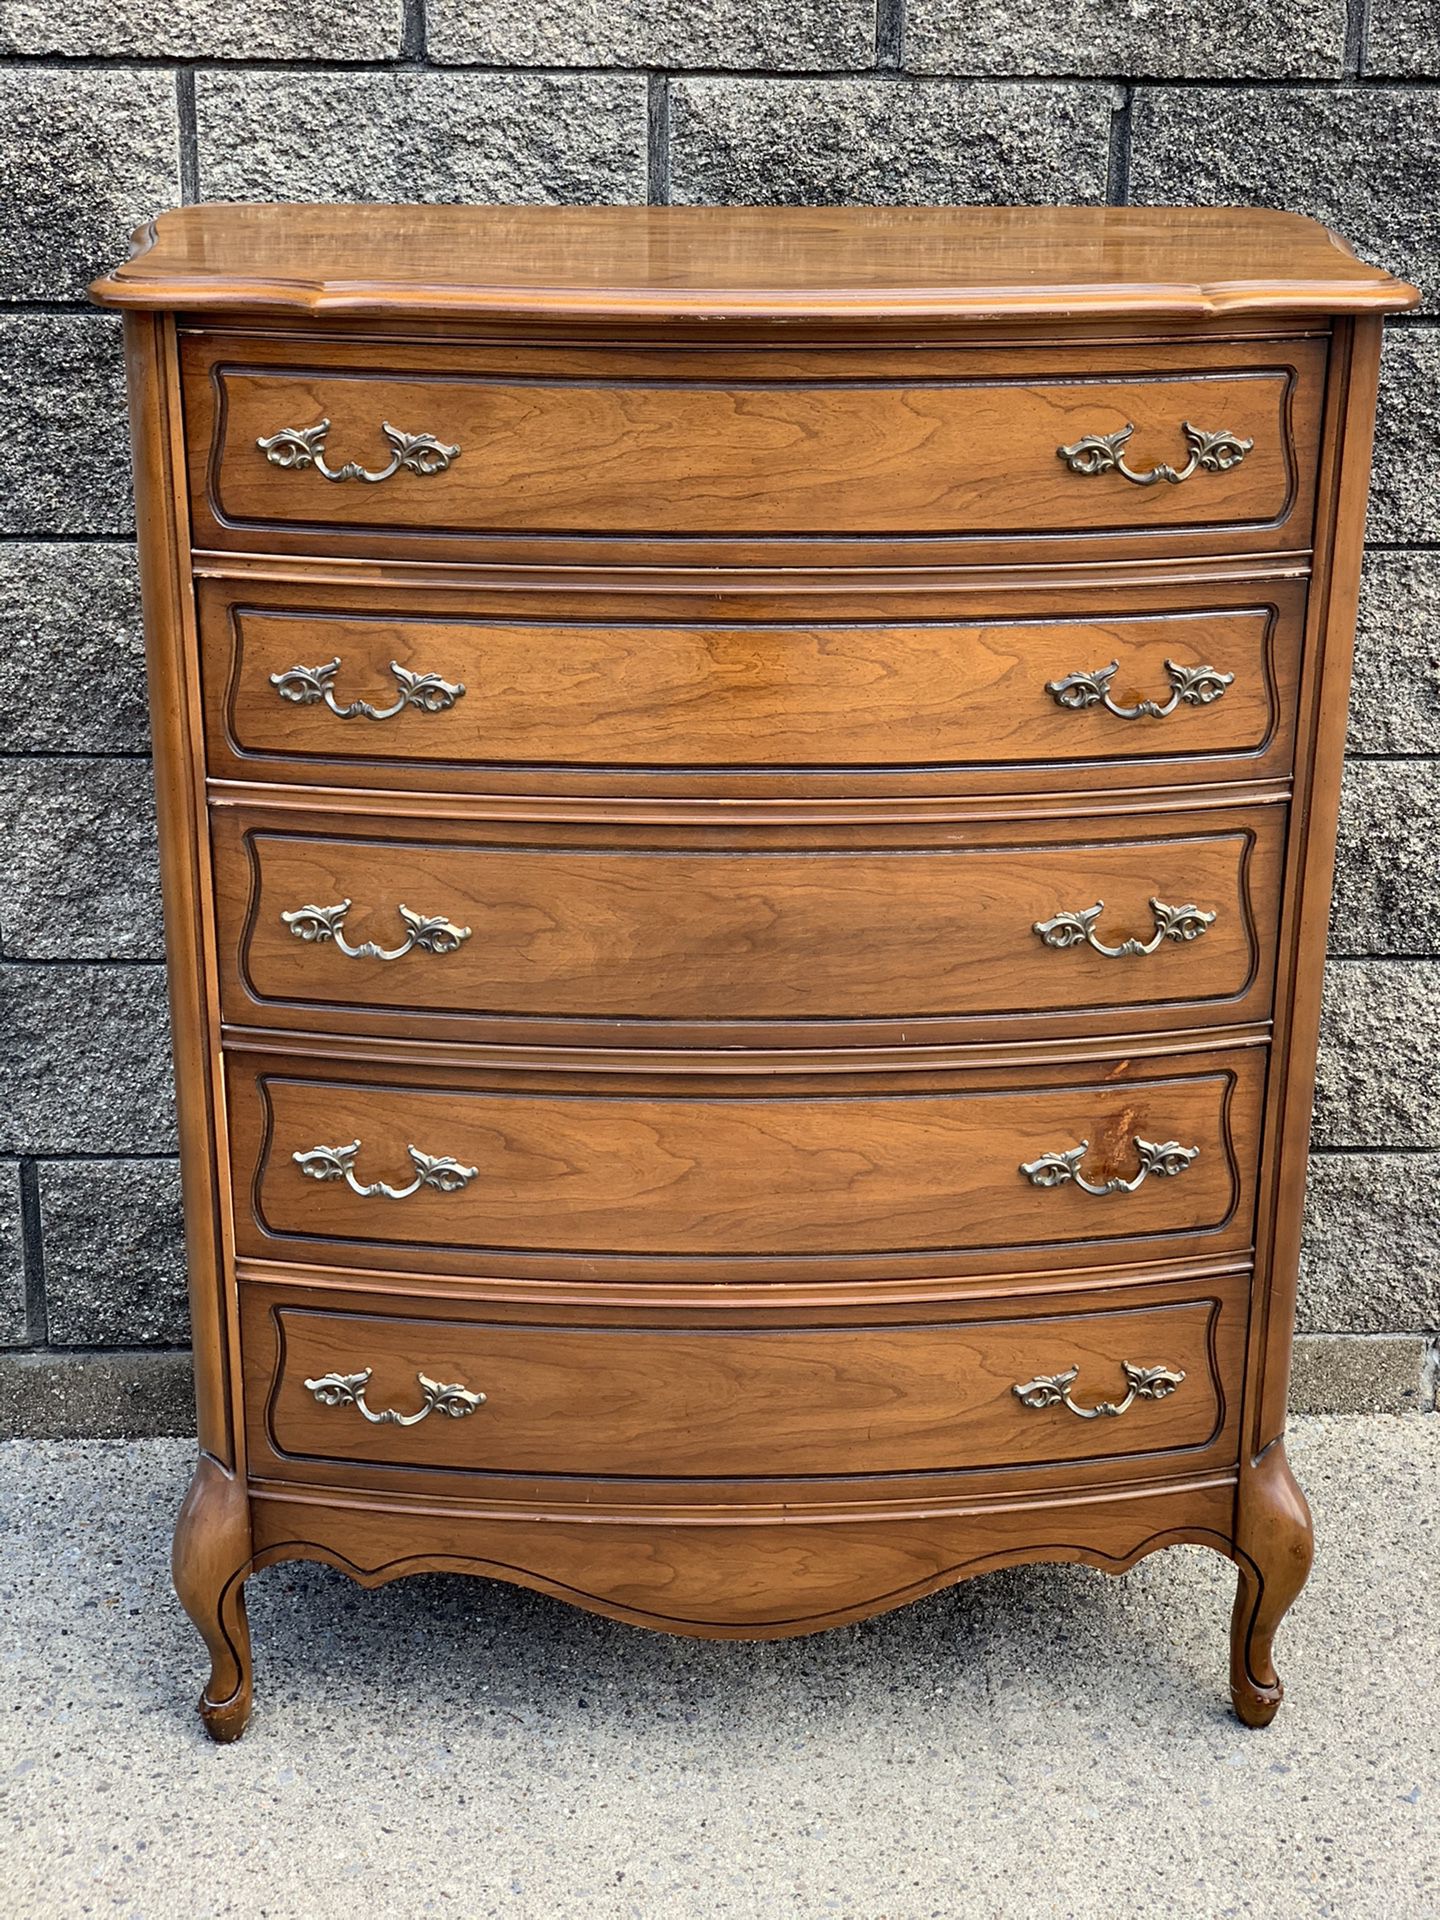 French Provincial highboy chest